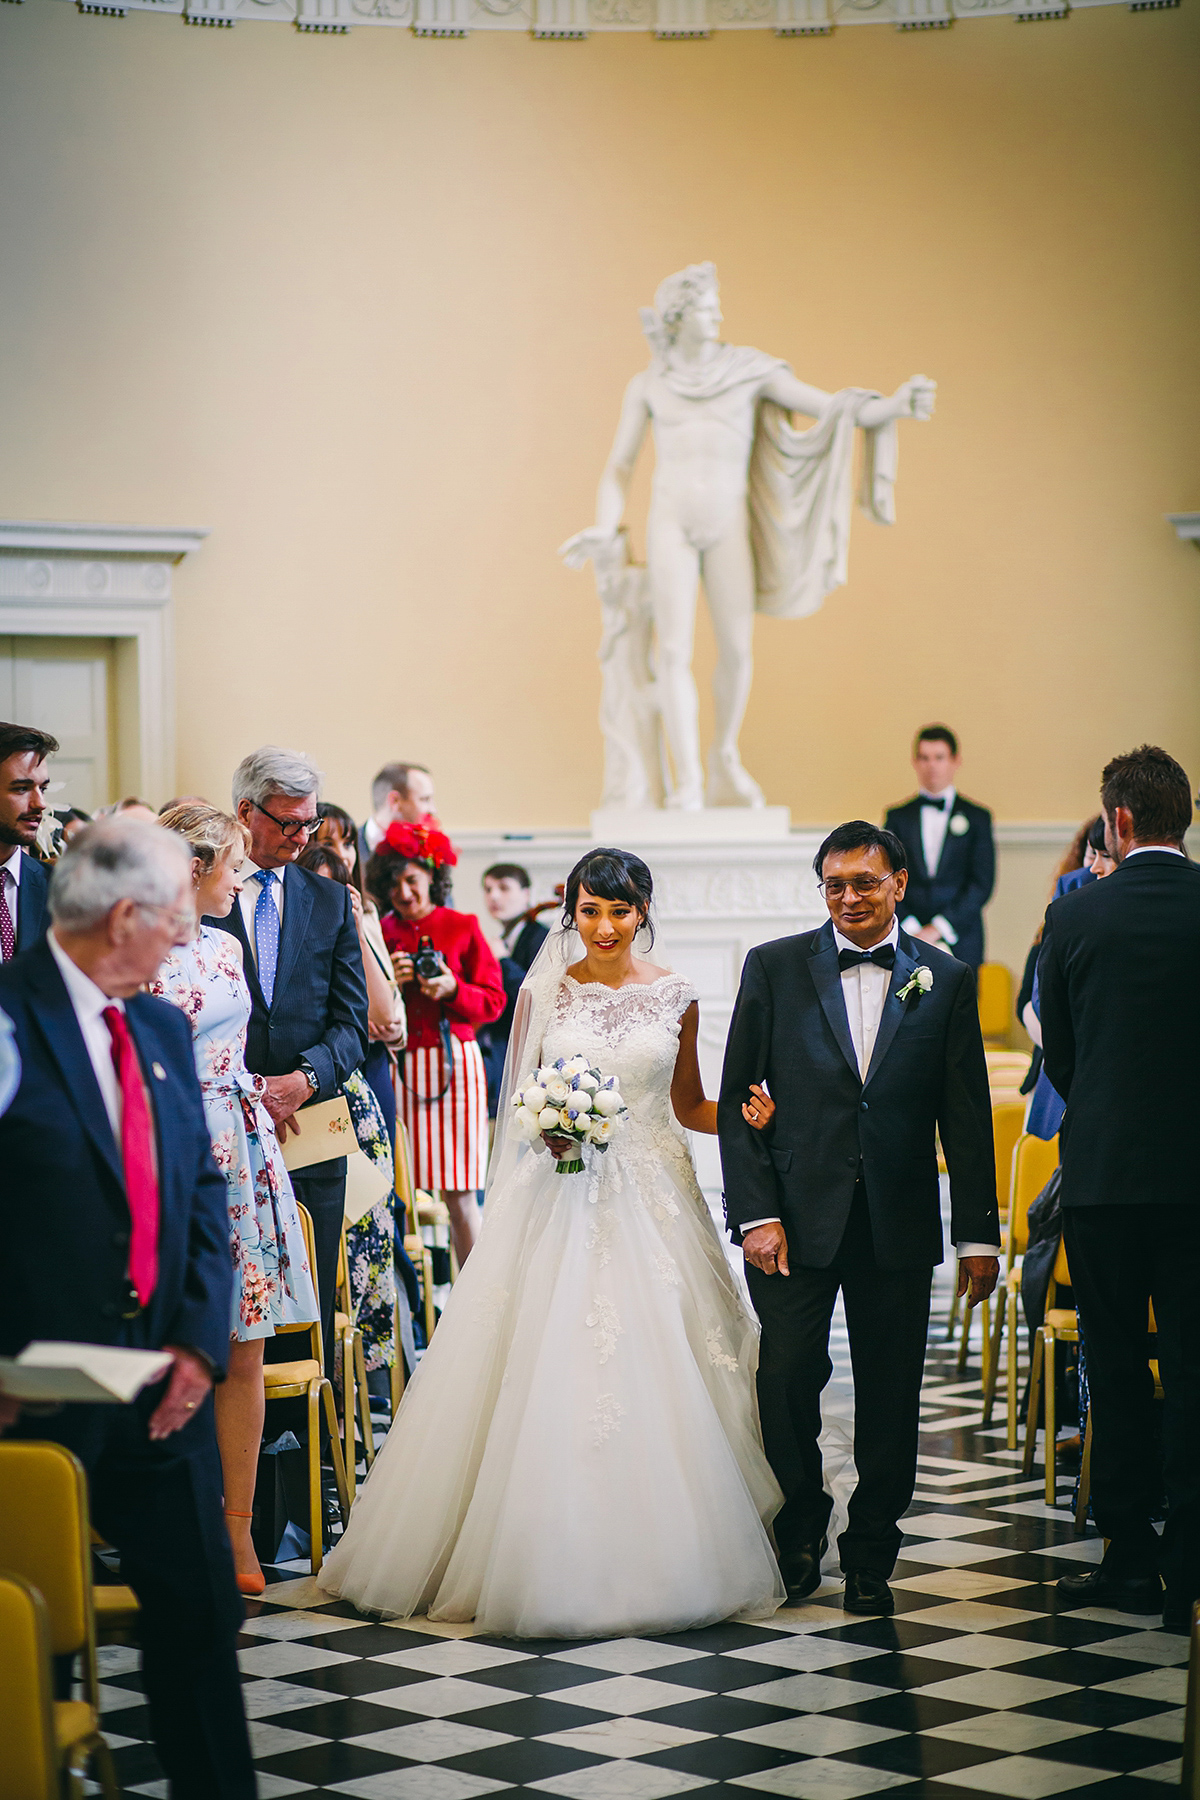 Sabrina and Nick had a multicultural wedding including an Anglican and Hindu ceremony at Syon Park in London. Sabrina wore Pronovias. Photography by Viva La weddings.